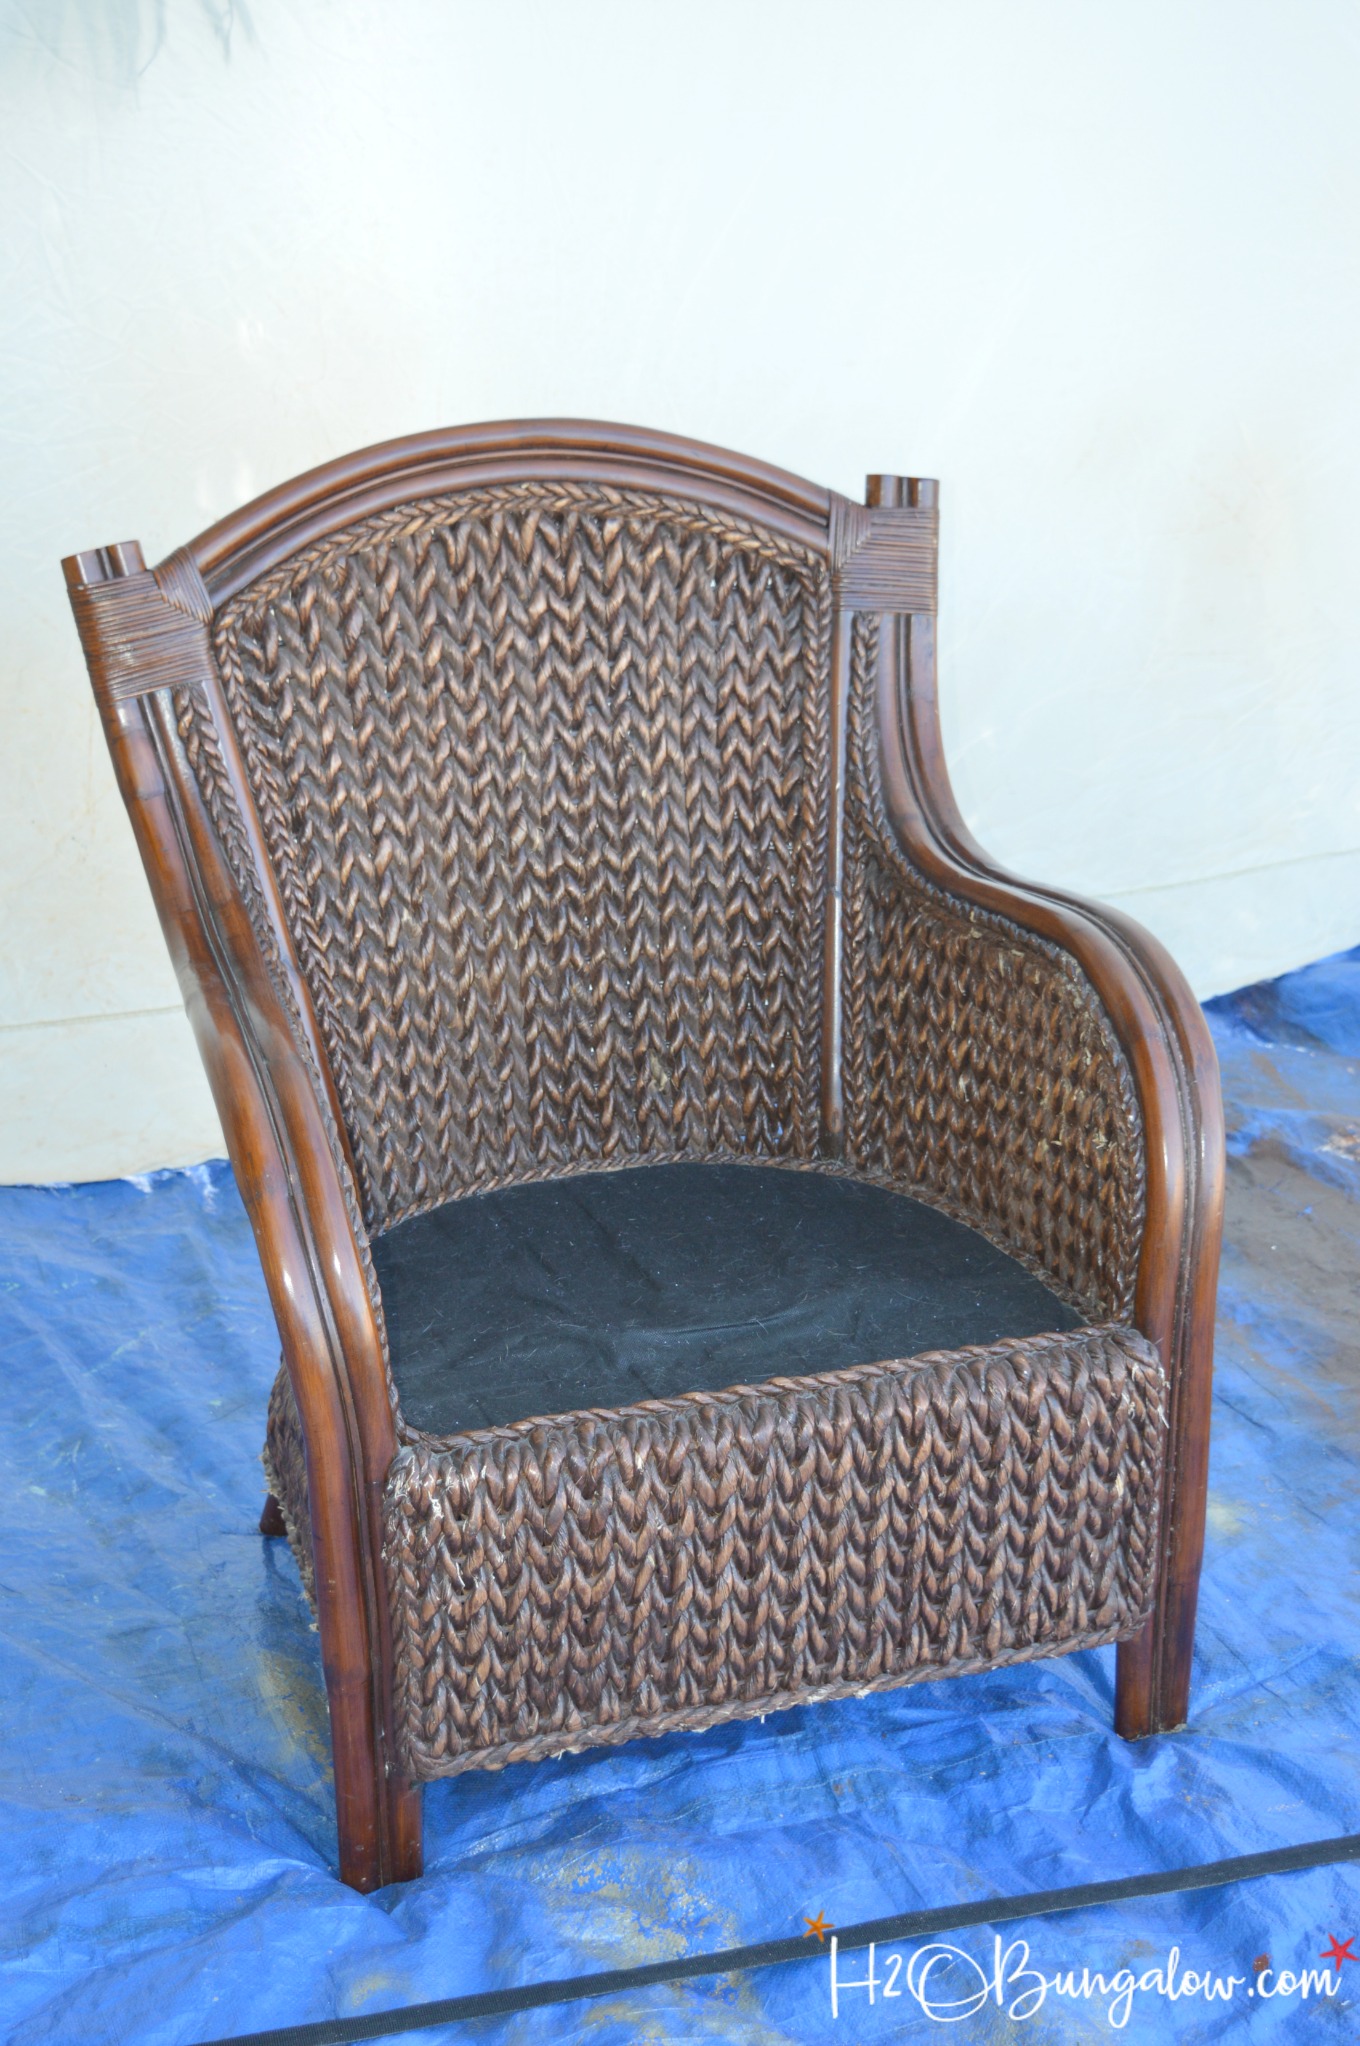 How To Paint Wicker Furniture Quickly And Easily H2obungalow